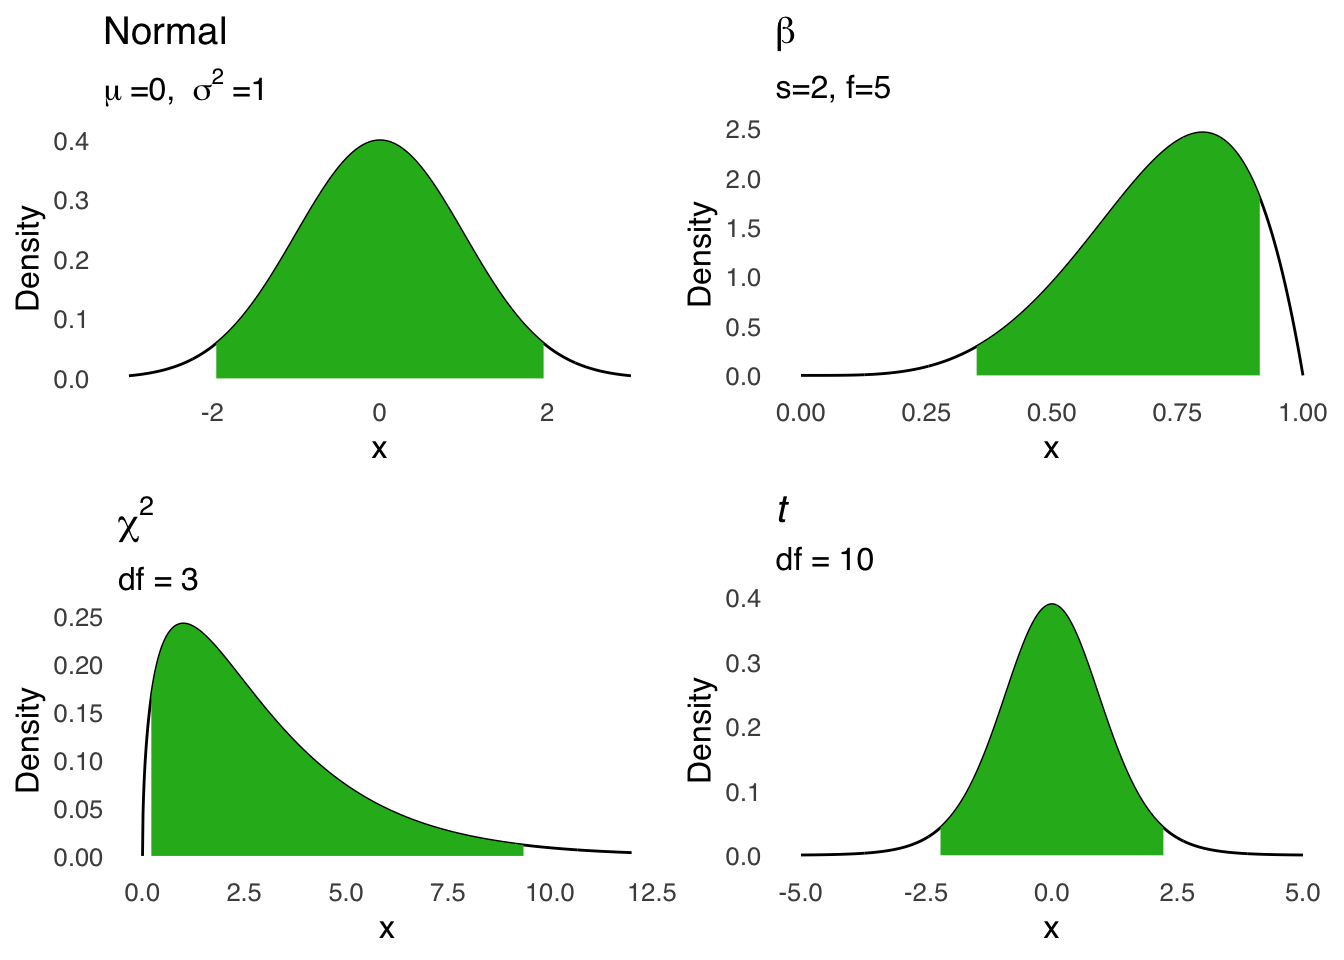 Visual Representations of 95% Intervals for Selected Probability Distributions